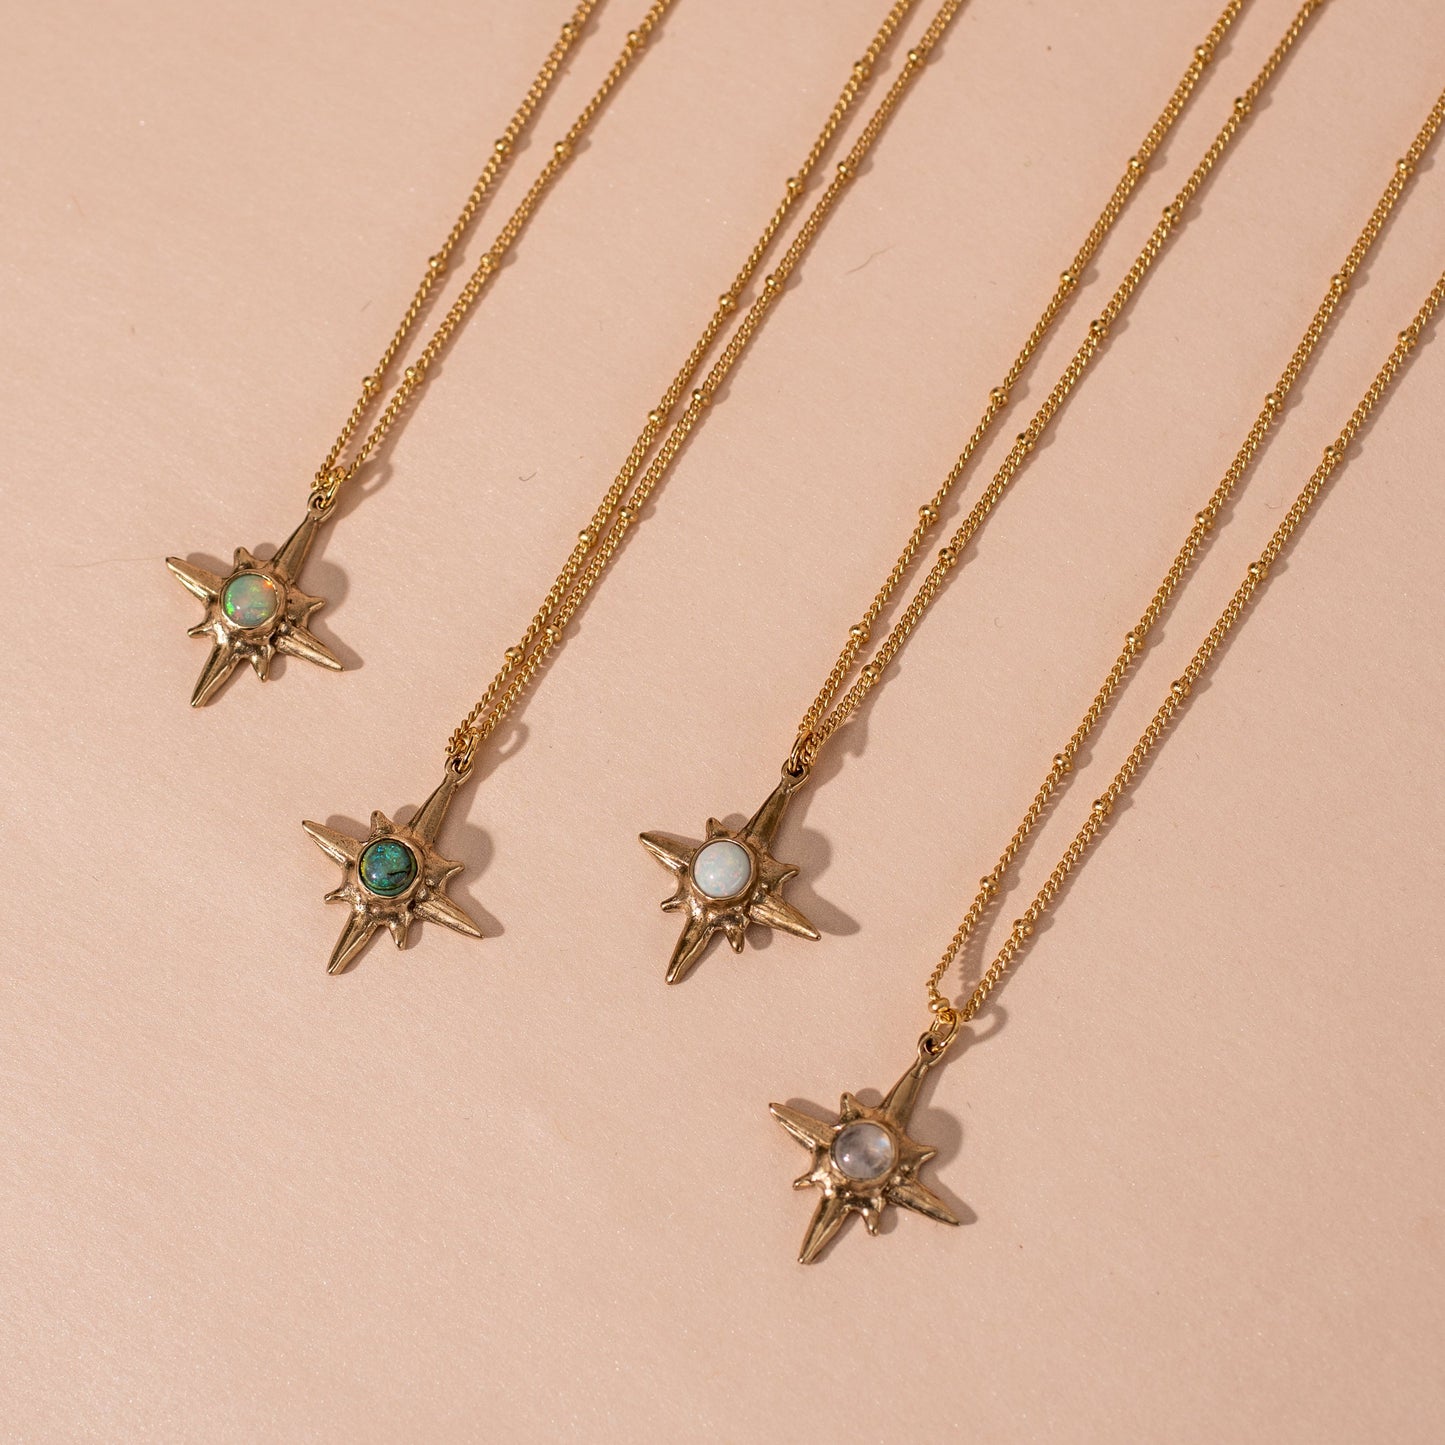 Collection of Shiny gold Iron Oxide North Star Polaris Necklaces set with gemstones